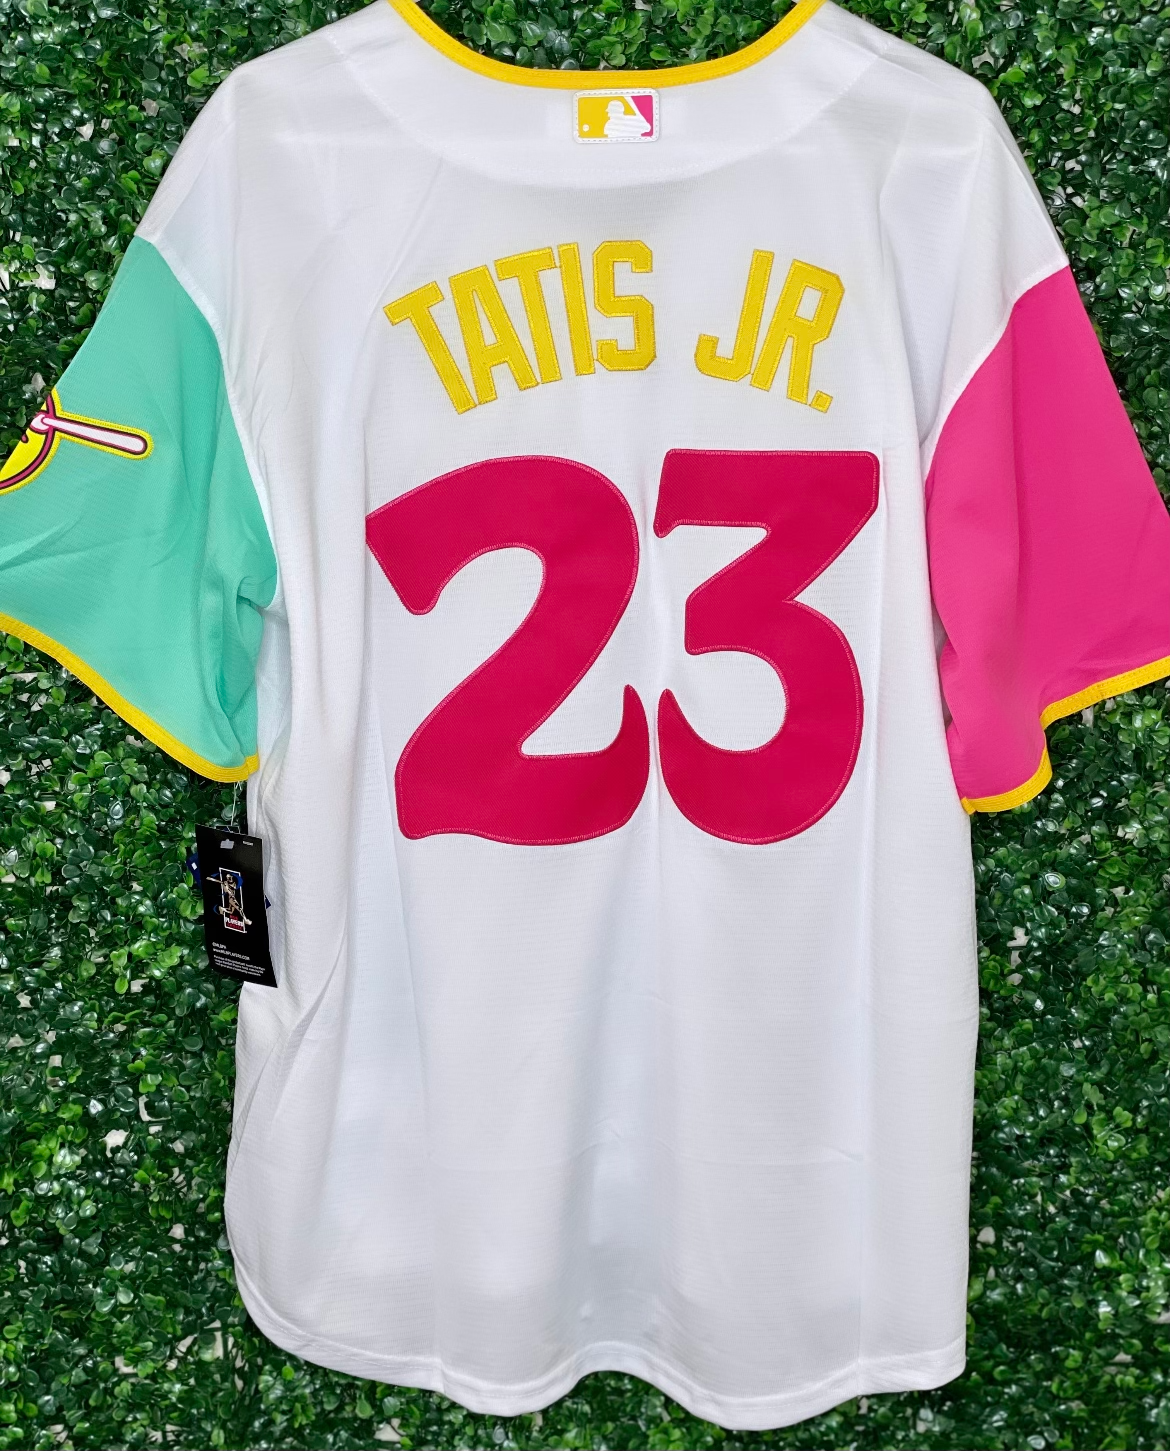 Tatis JR San Diego Padres Jersey-City connect for Sale in Chula